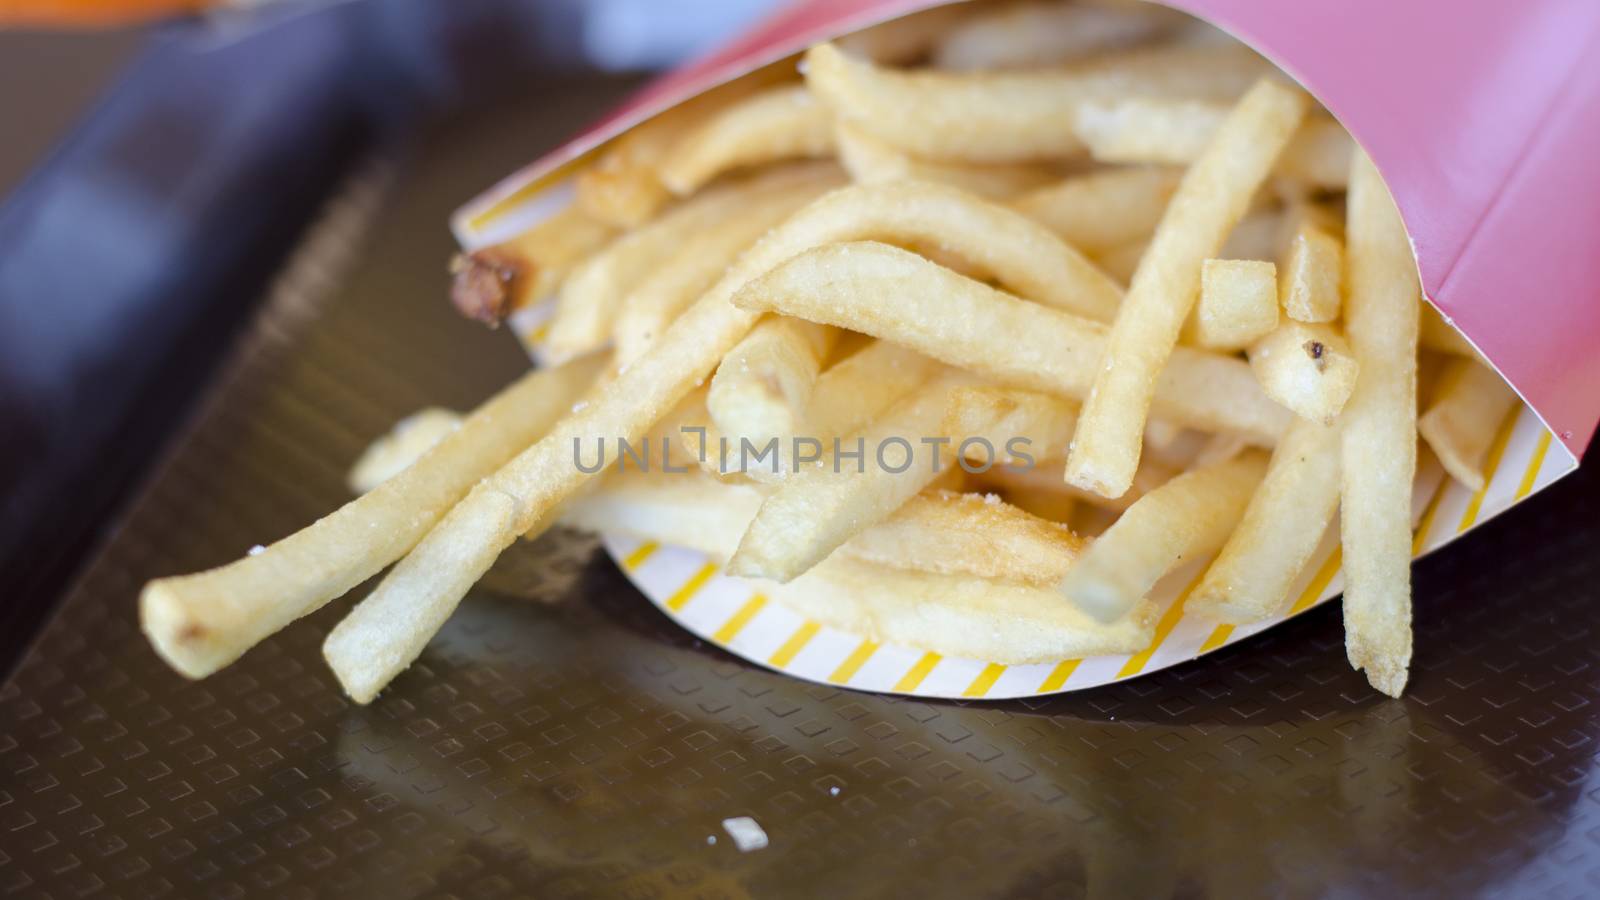 french fries on dish in restaurant